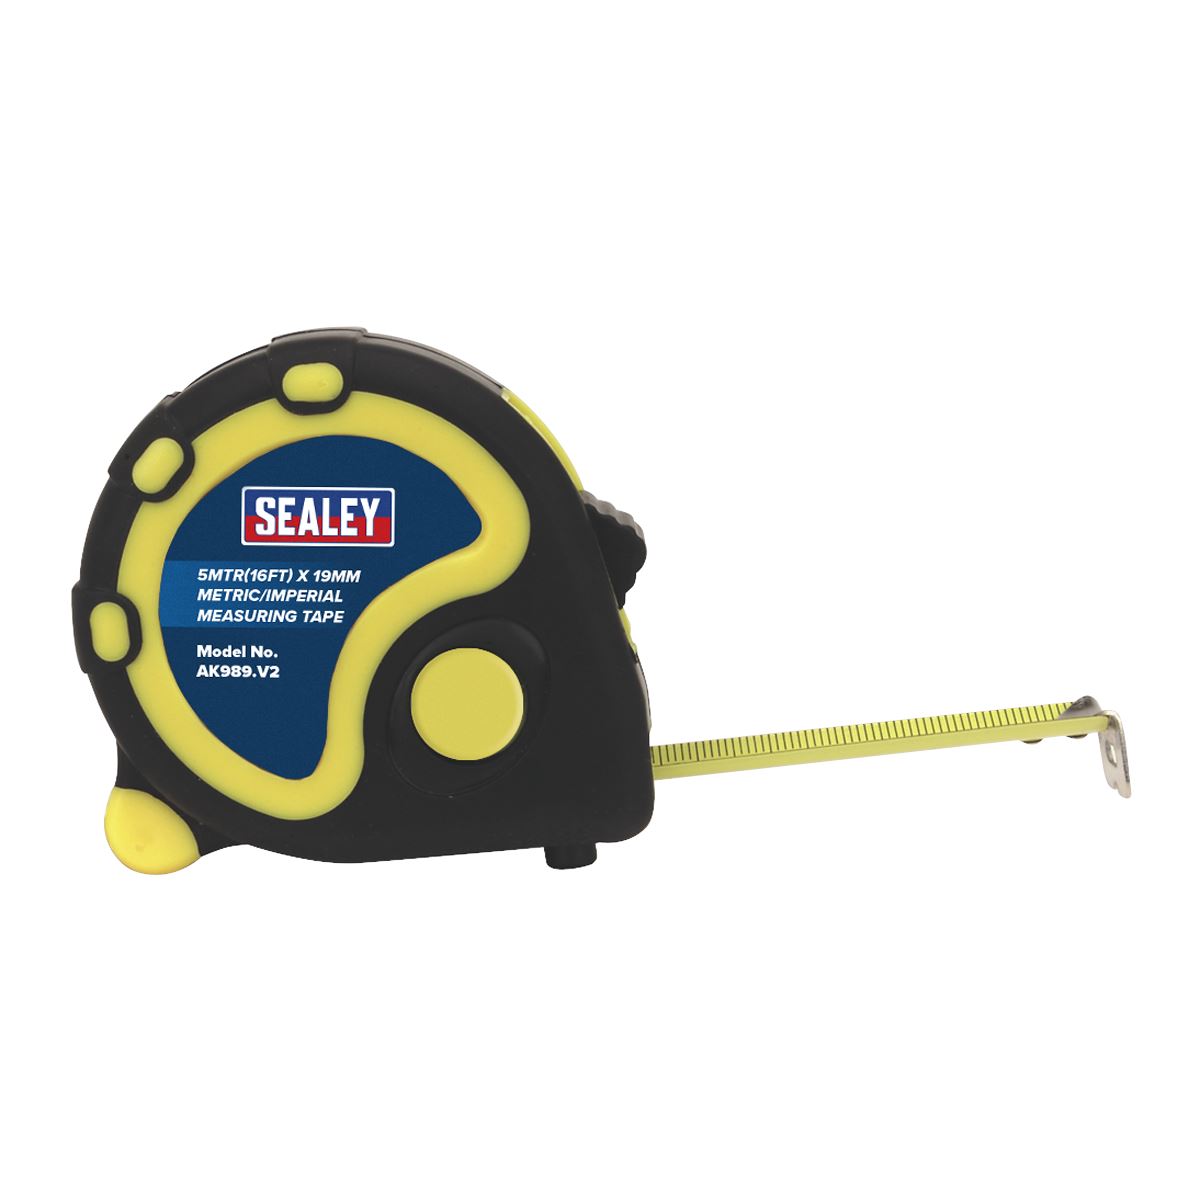 Sealey Rubber Tape Measure 5m(16ft) x 19mm Metric/Imperial Display Box of 12